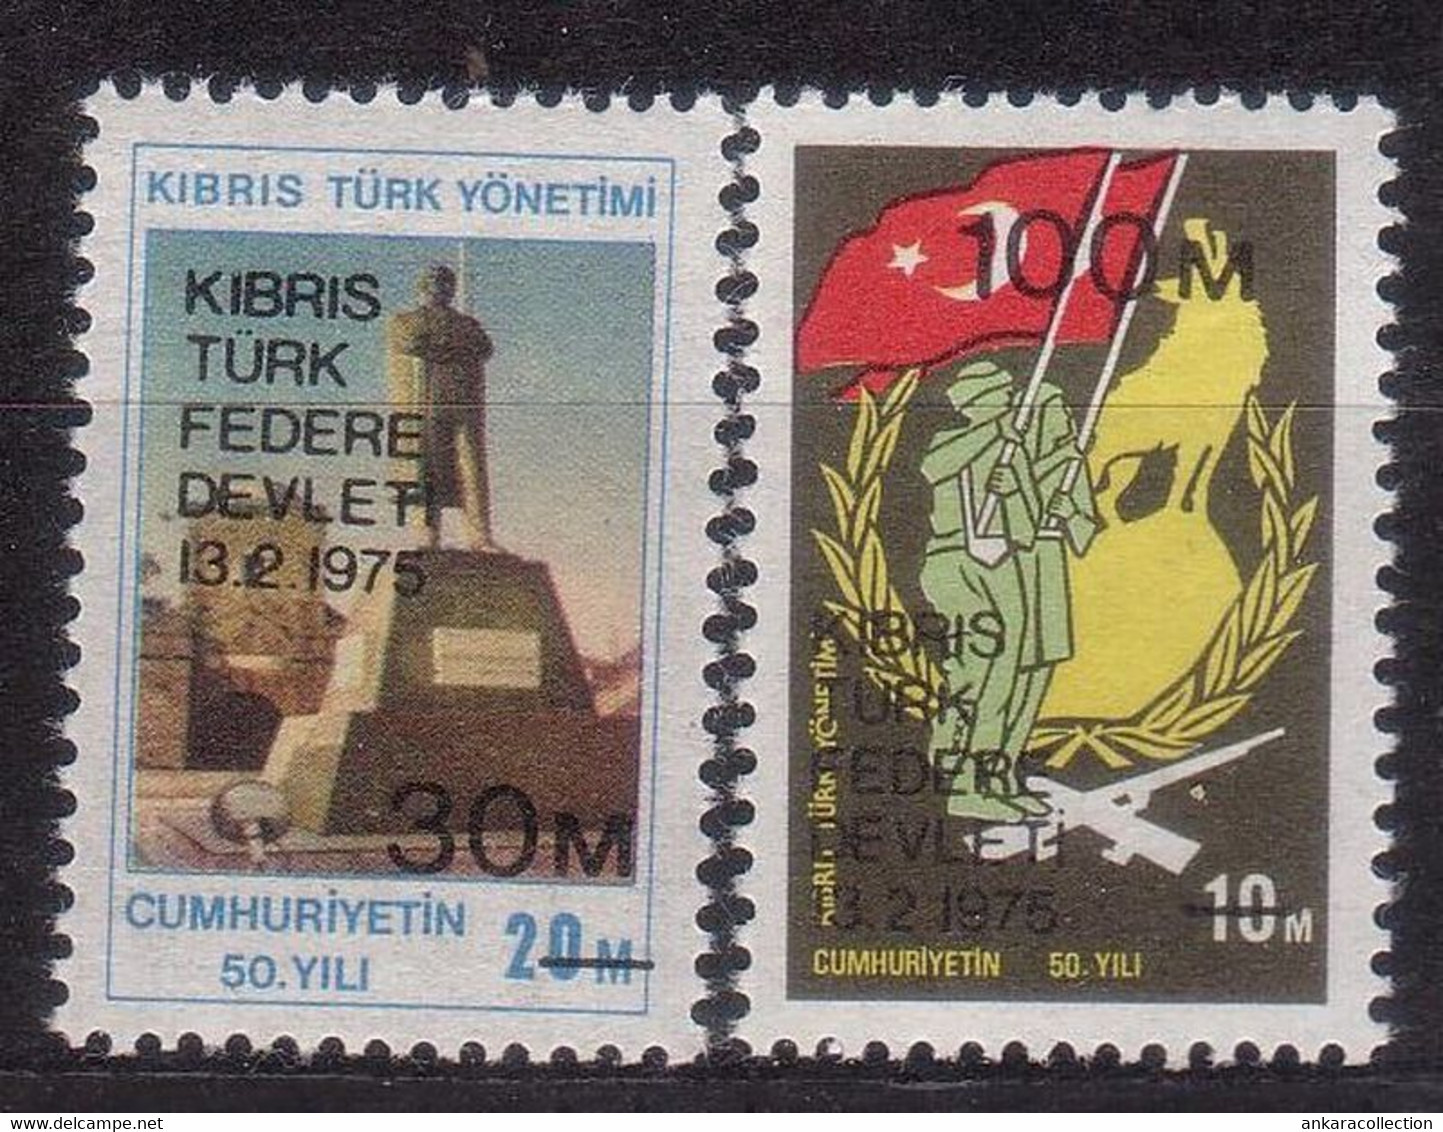 AC - NORTHERN CYPRUS STAMP - FOUNDATION OF FEDERAL STATE OF TURKISH CYPRUS MNH 03 MARCH 1975 - Ungebraucht